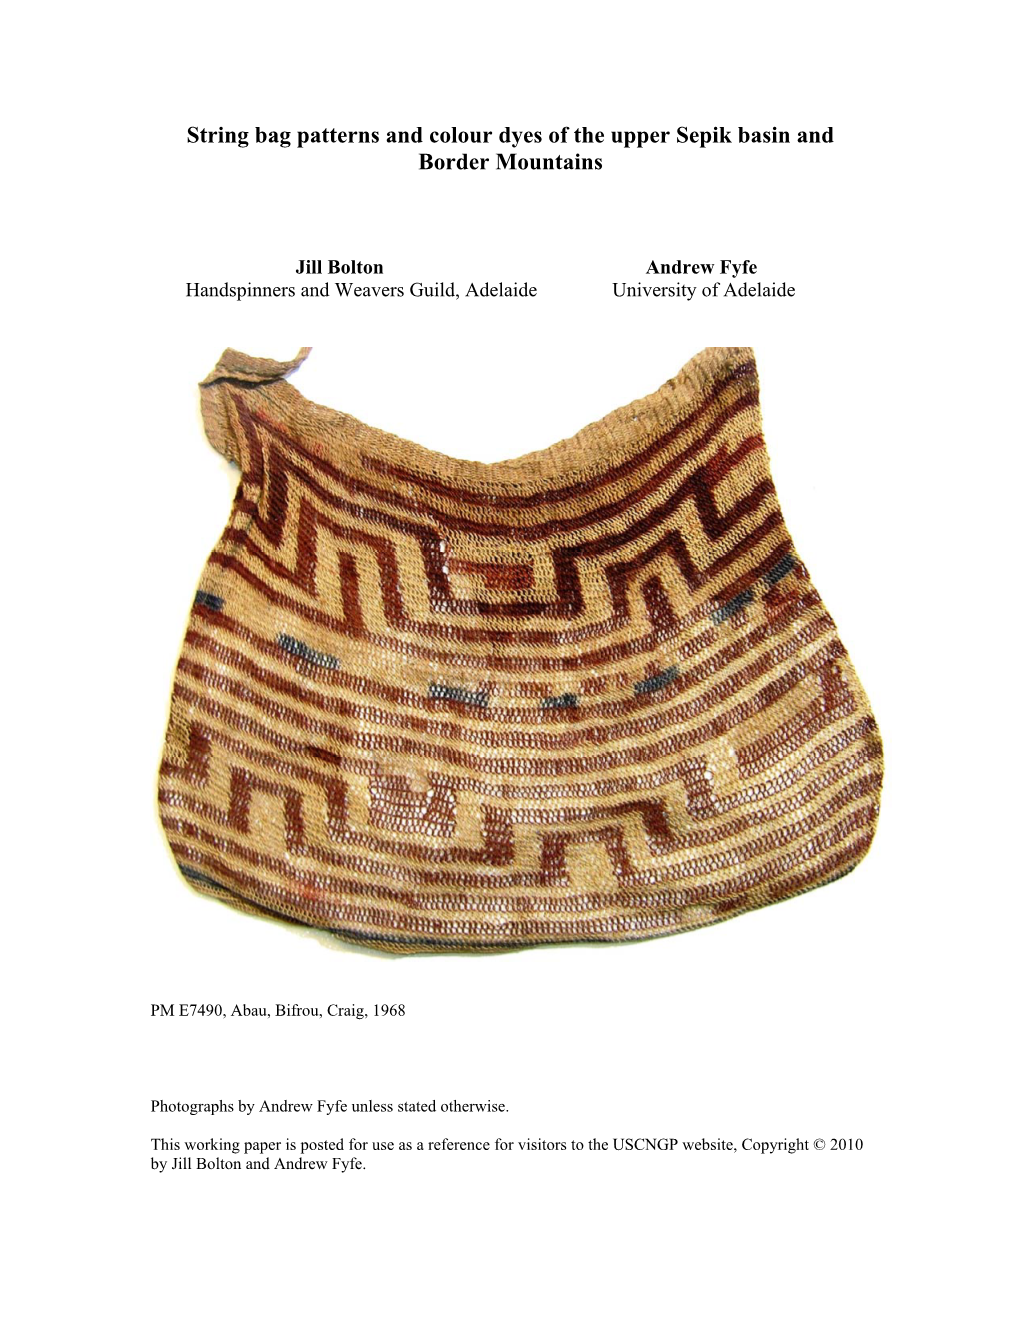 String Bag Patterns and Colour Dyes of the Upper Sepik Basin and Border Mountains